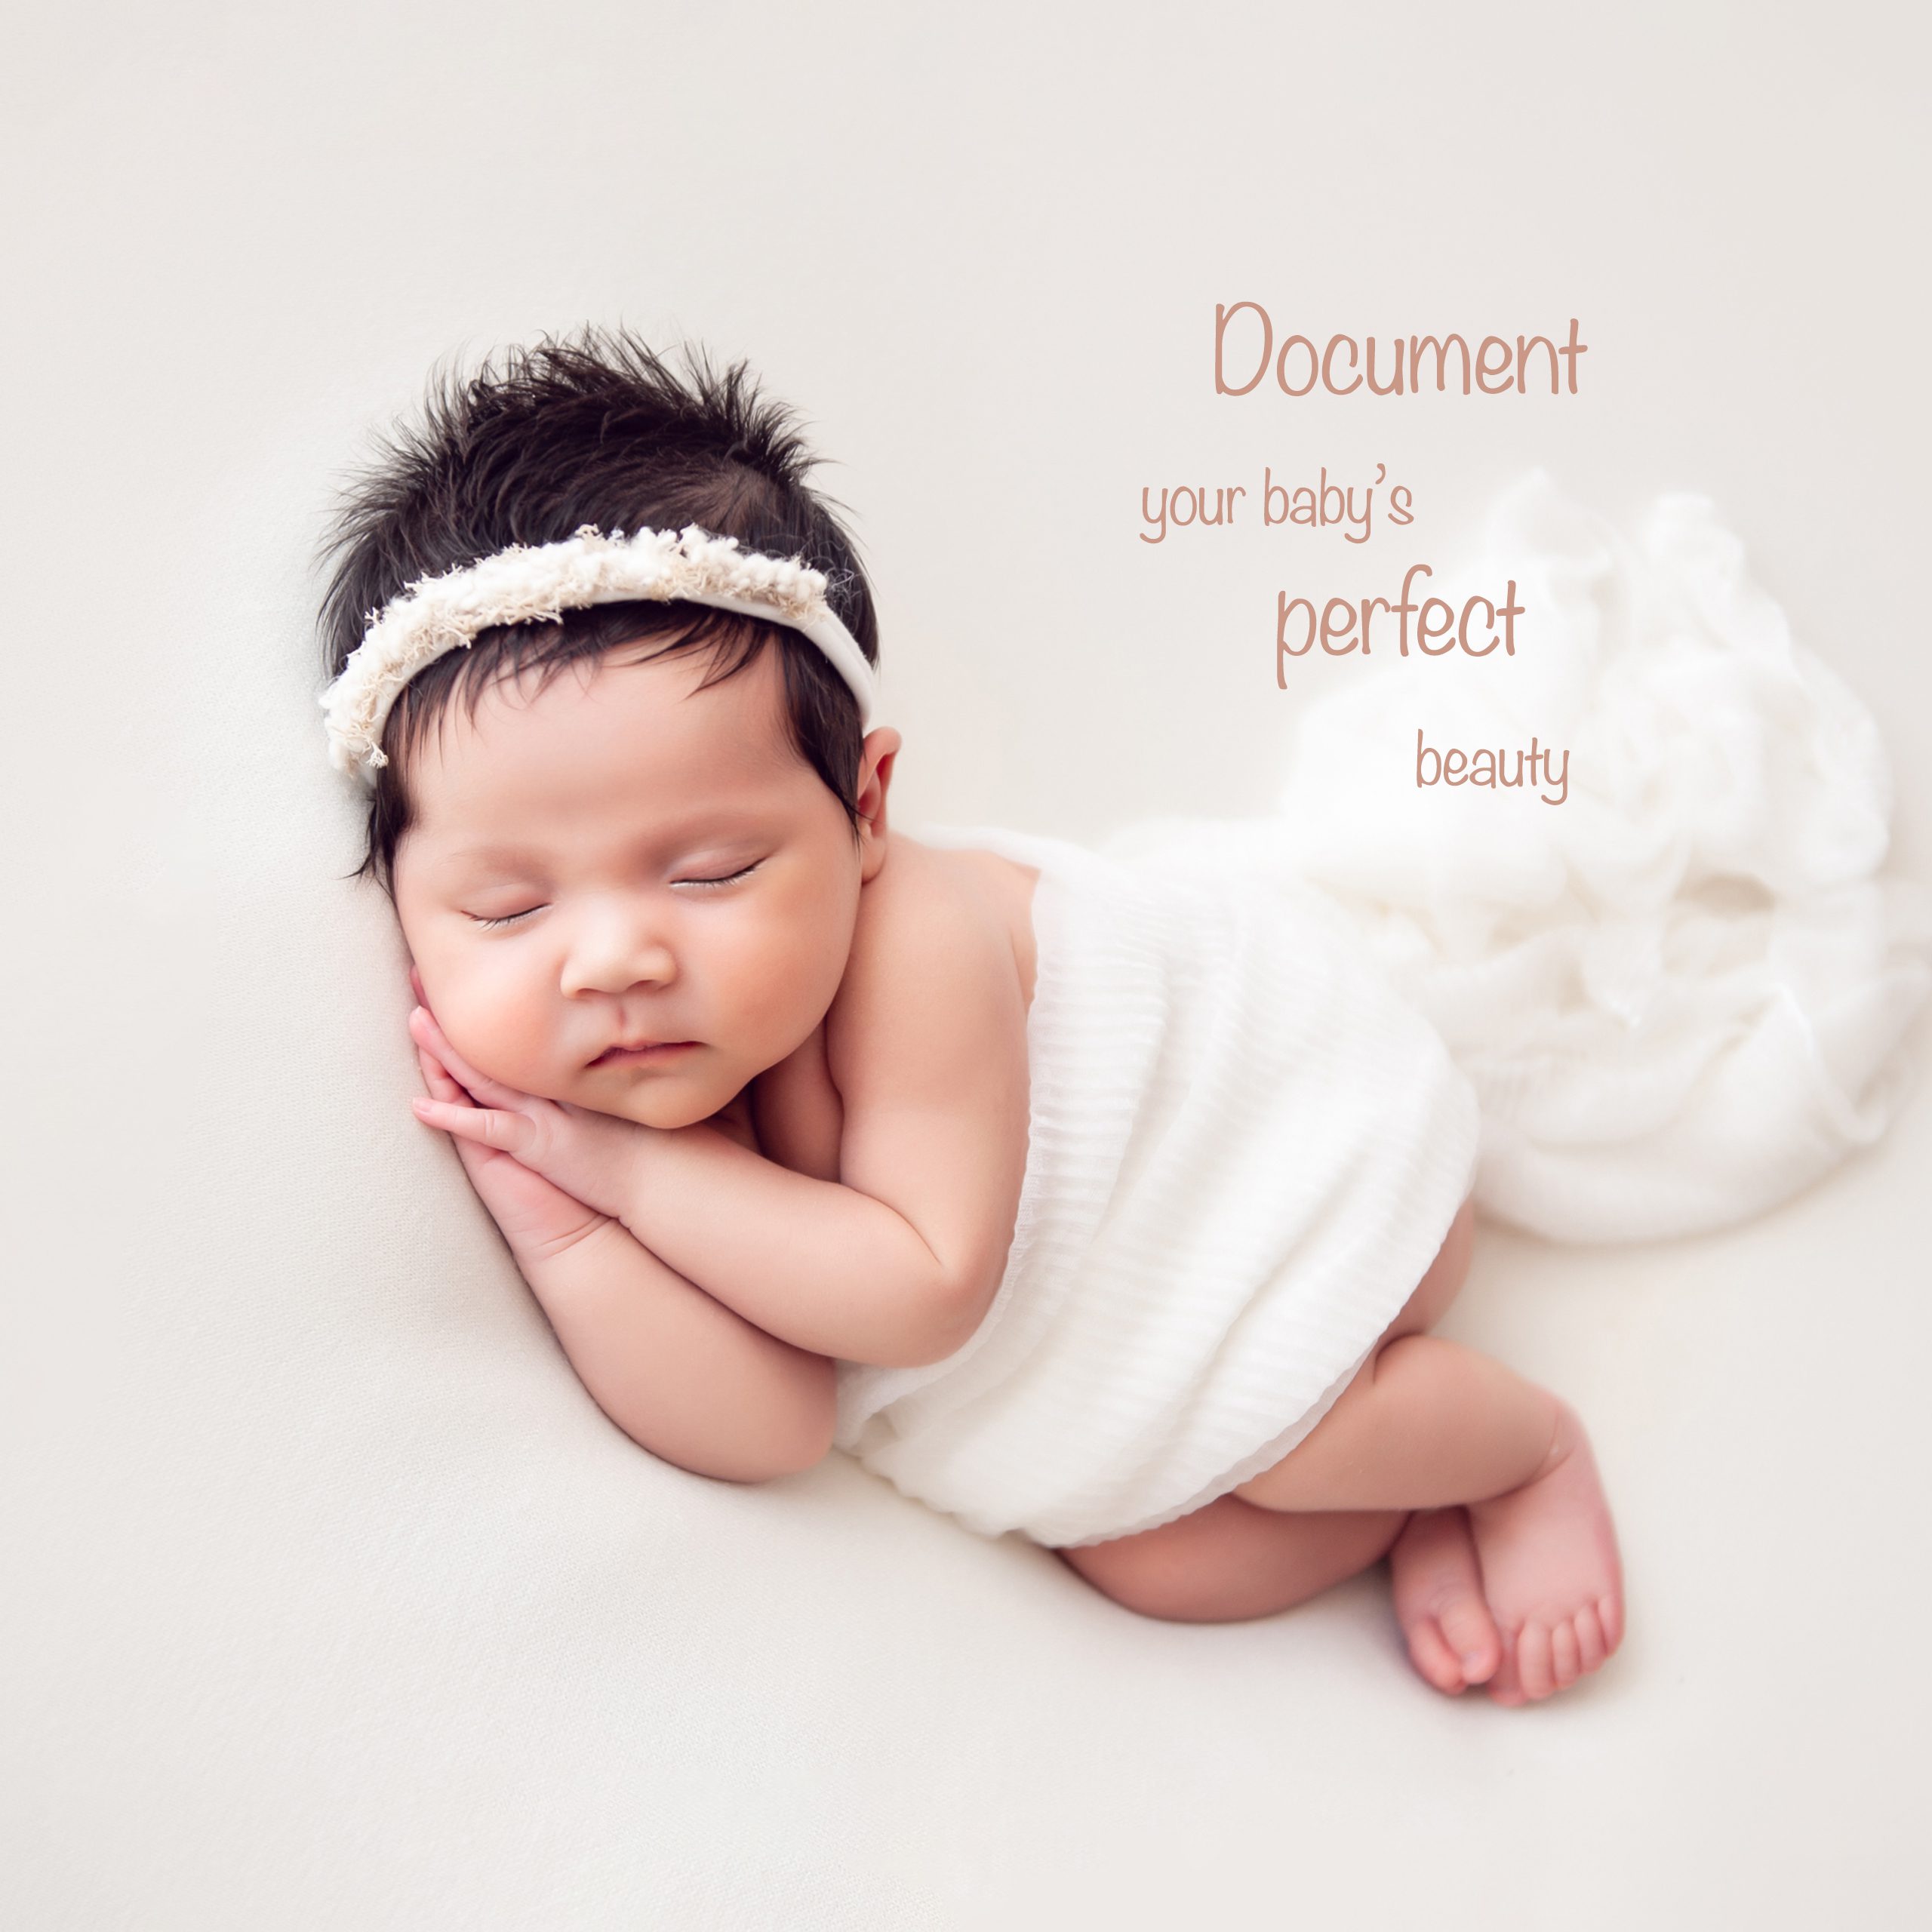 document your baby's perfect beauty